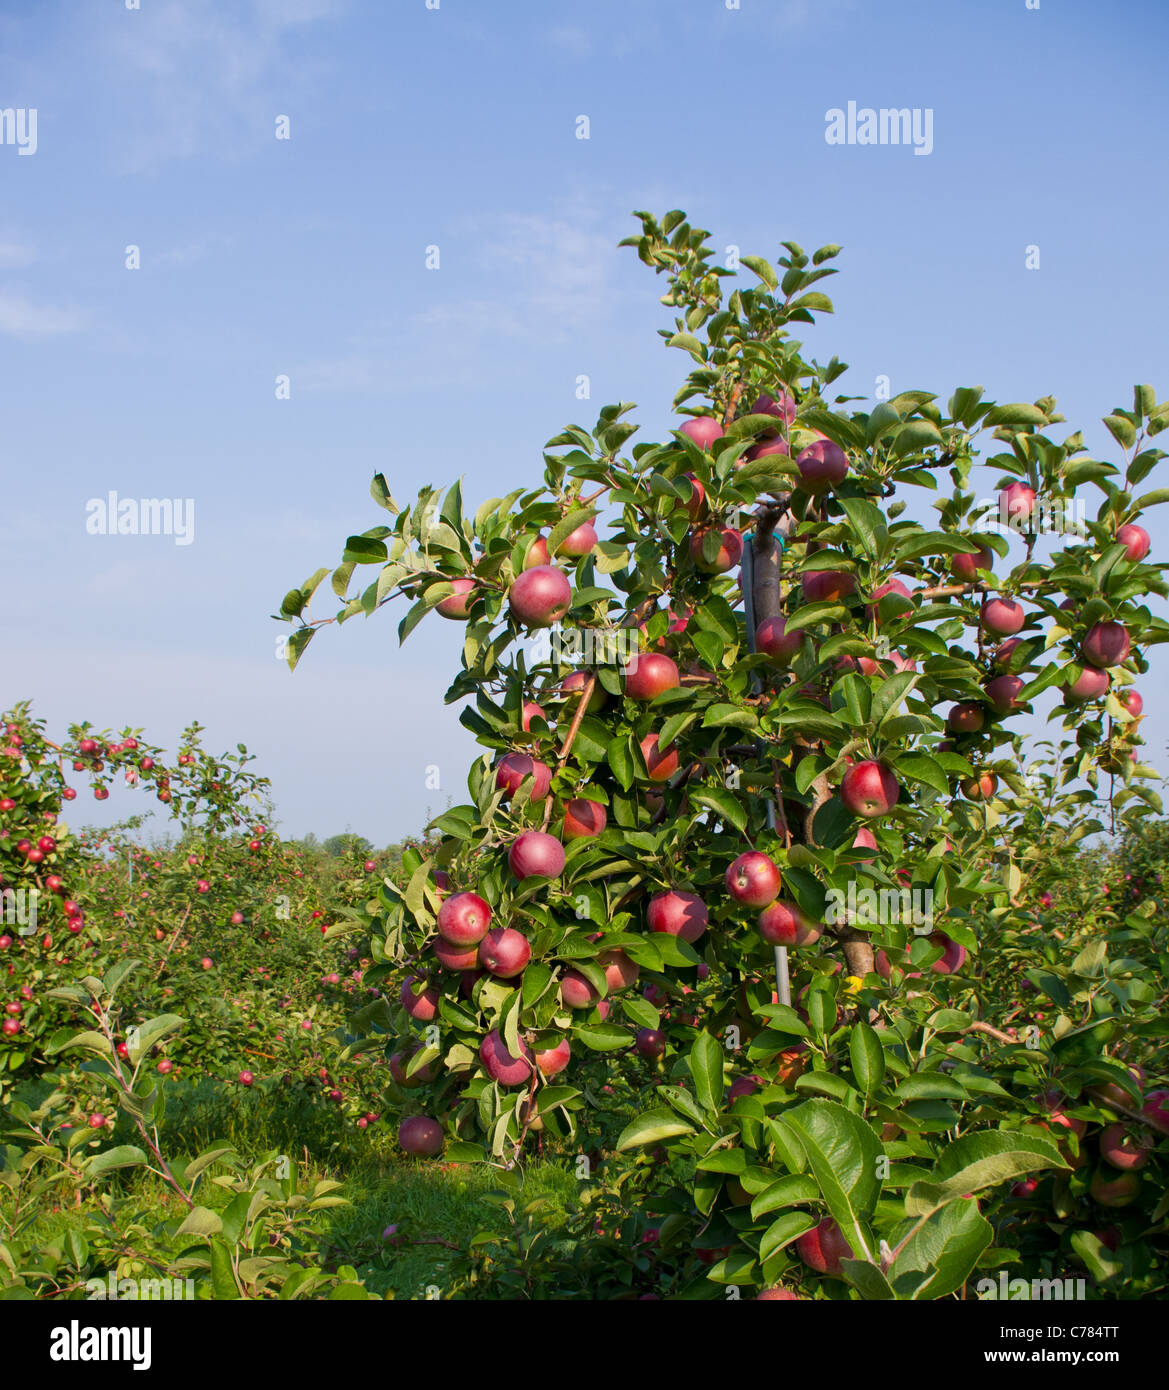 Apples on the trees in an apple orchard Stock Photo